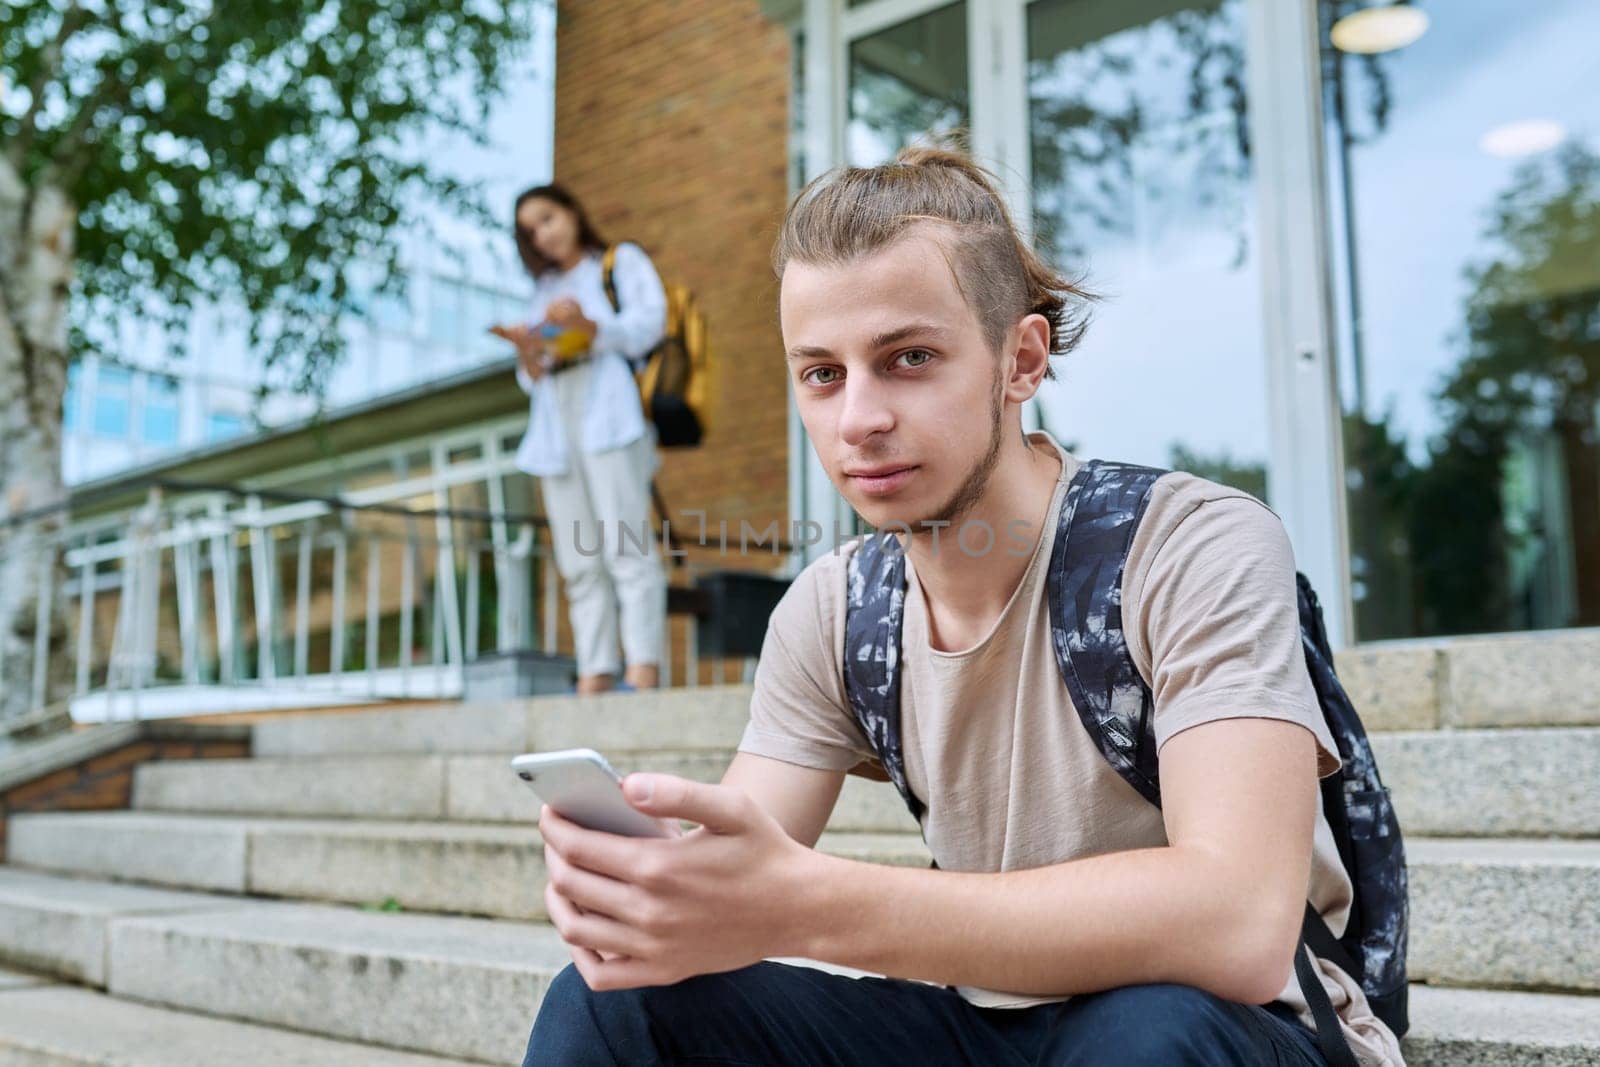 Hipster guy smiling teenager student 18, 19 years old with backpack smartphone looking at camera, sitting on steps of outdoor educational building. Youth, education, lifestyle, technology